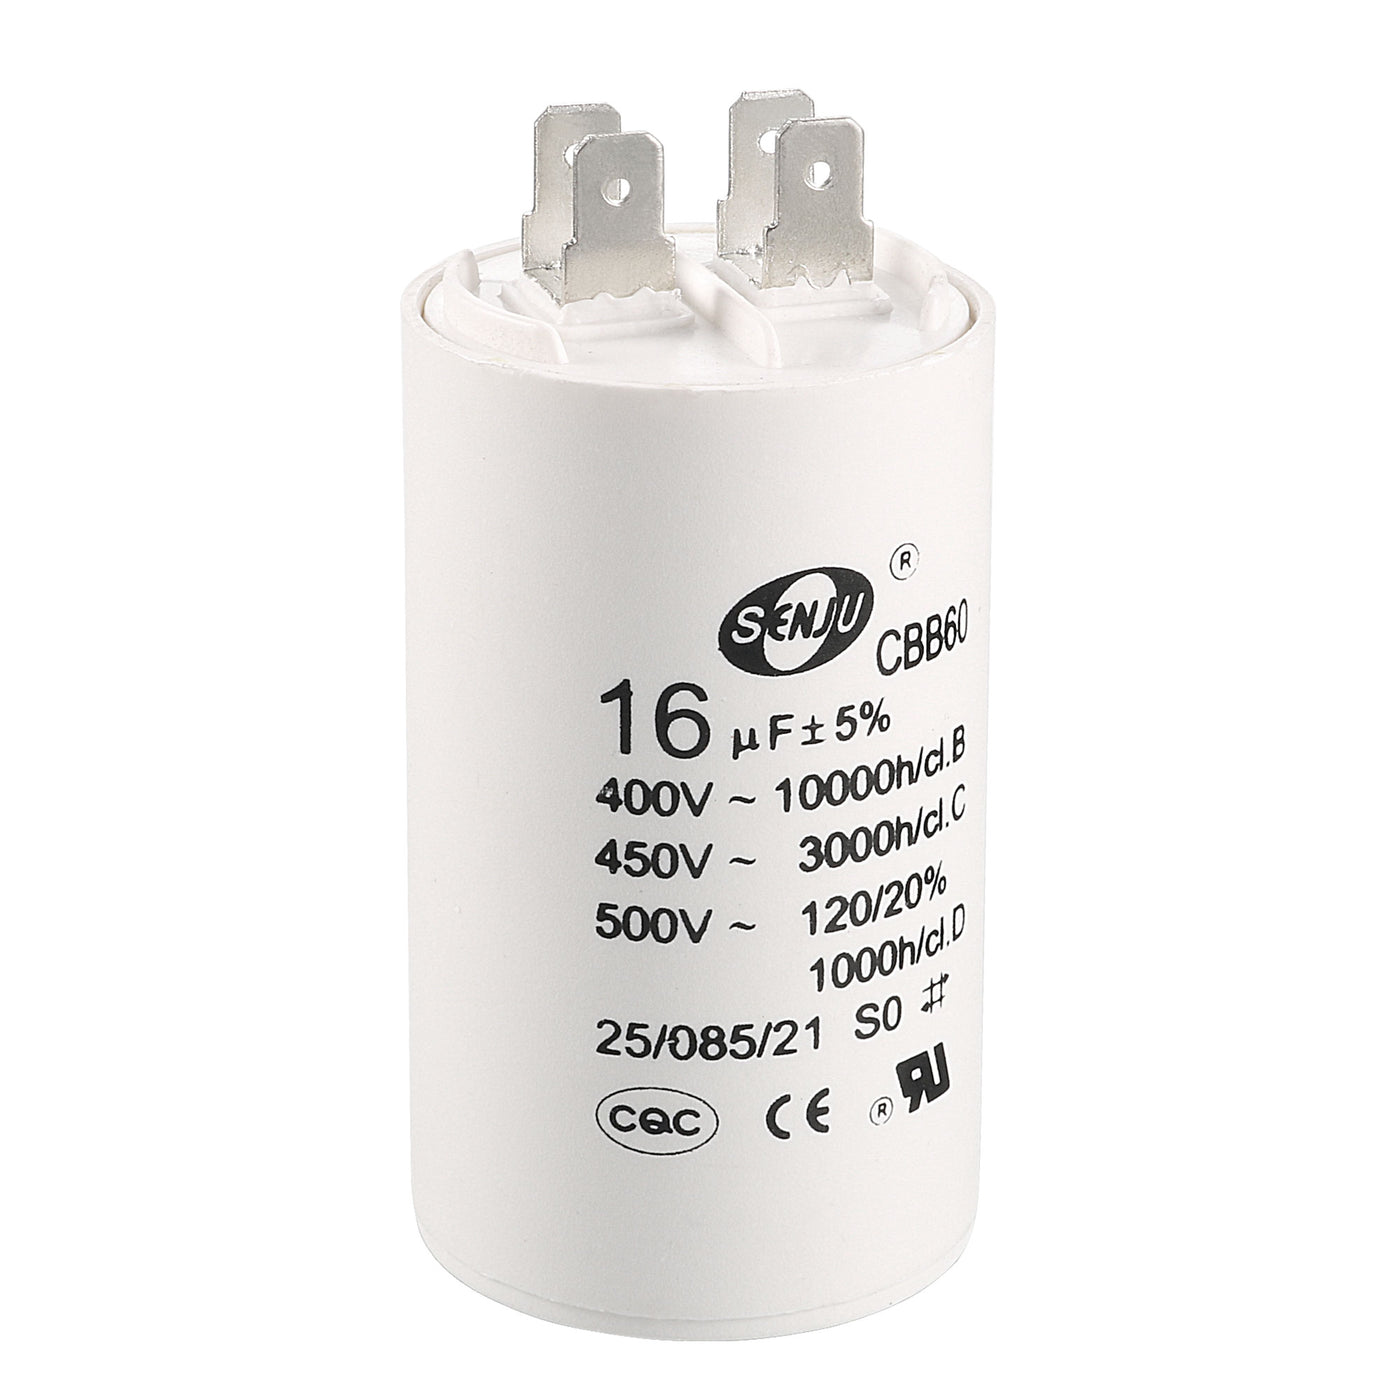 uxcell Uxcell CBB60 Run Capacitor 16uF 450V AC Double Insert 50/60Hz Cylinder 72x40mm White for Air Compressor Water Pump Motor